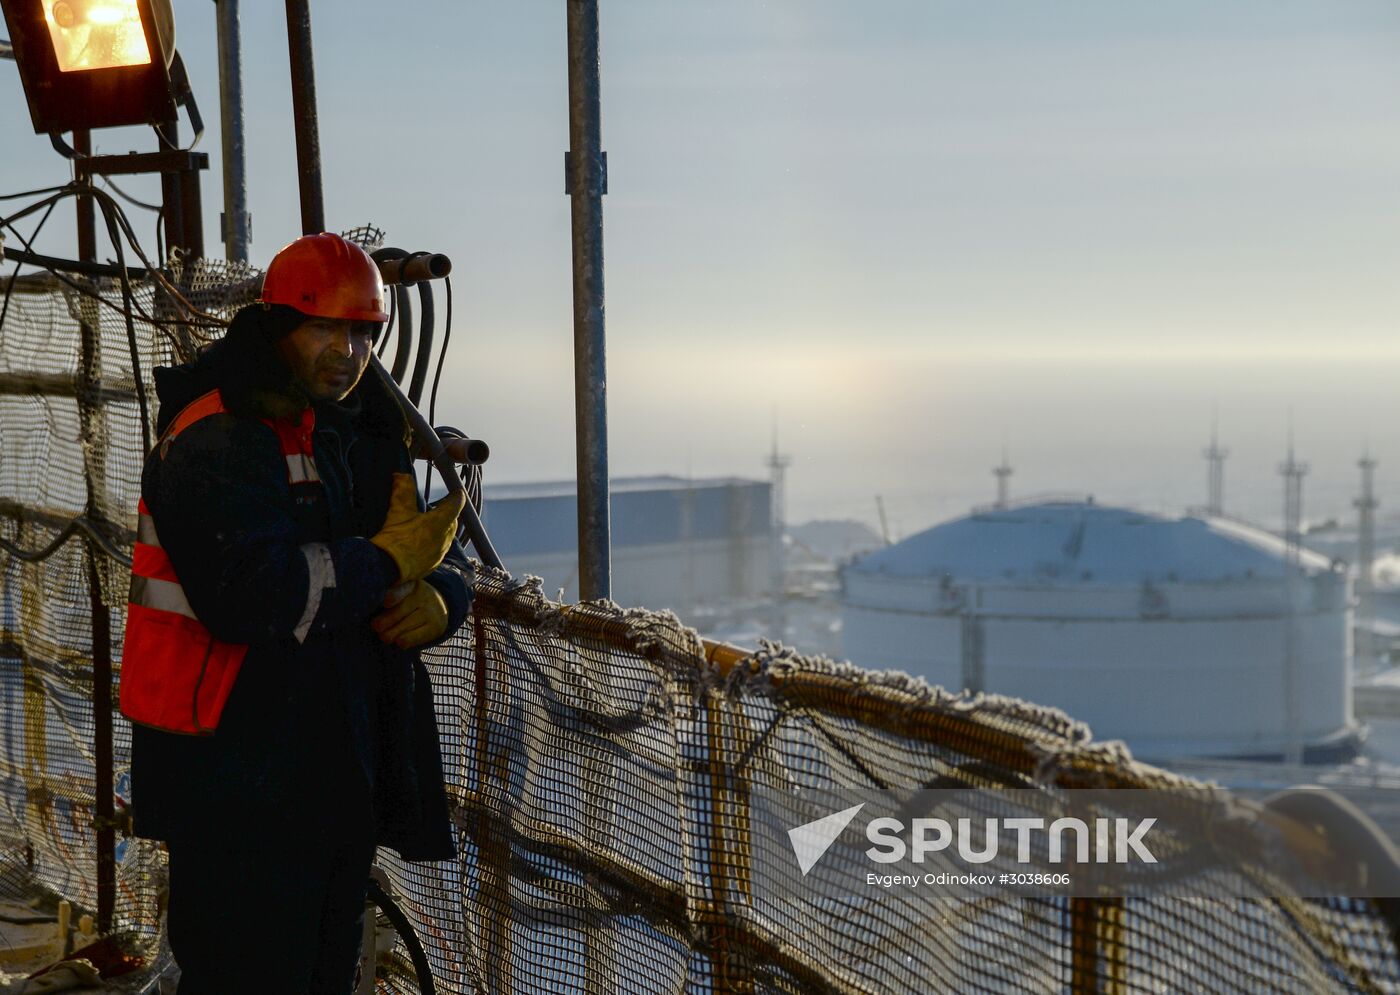 Building Yamal LNG liquefied natural gas plant